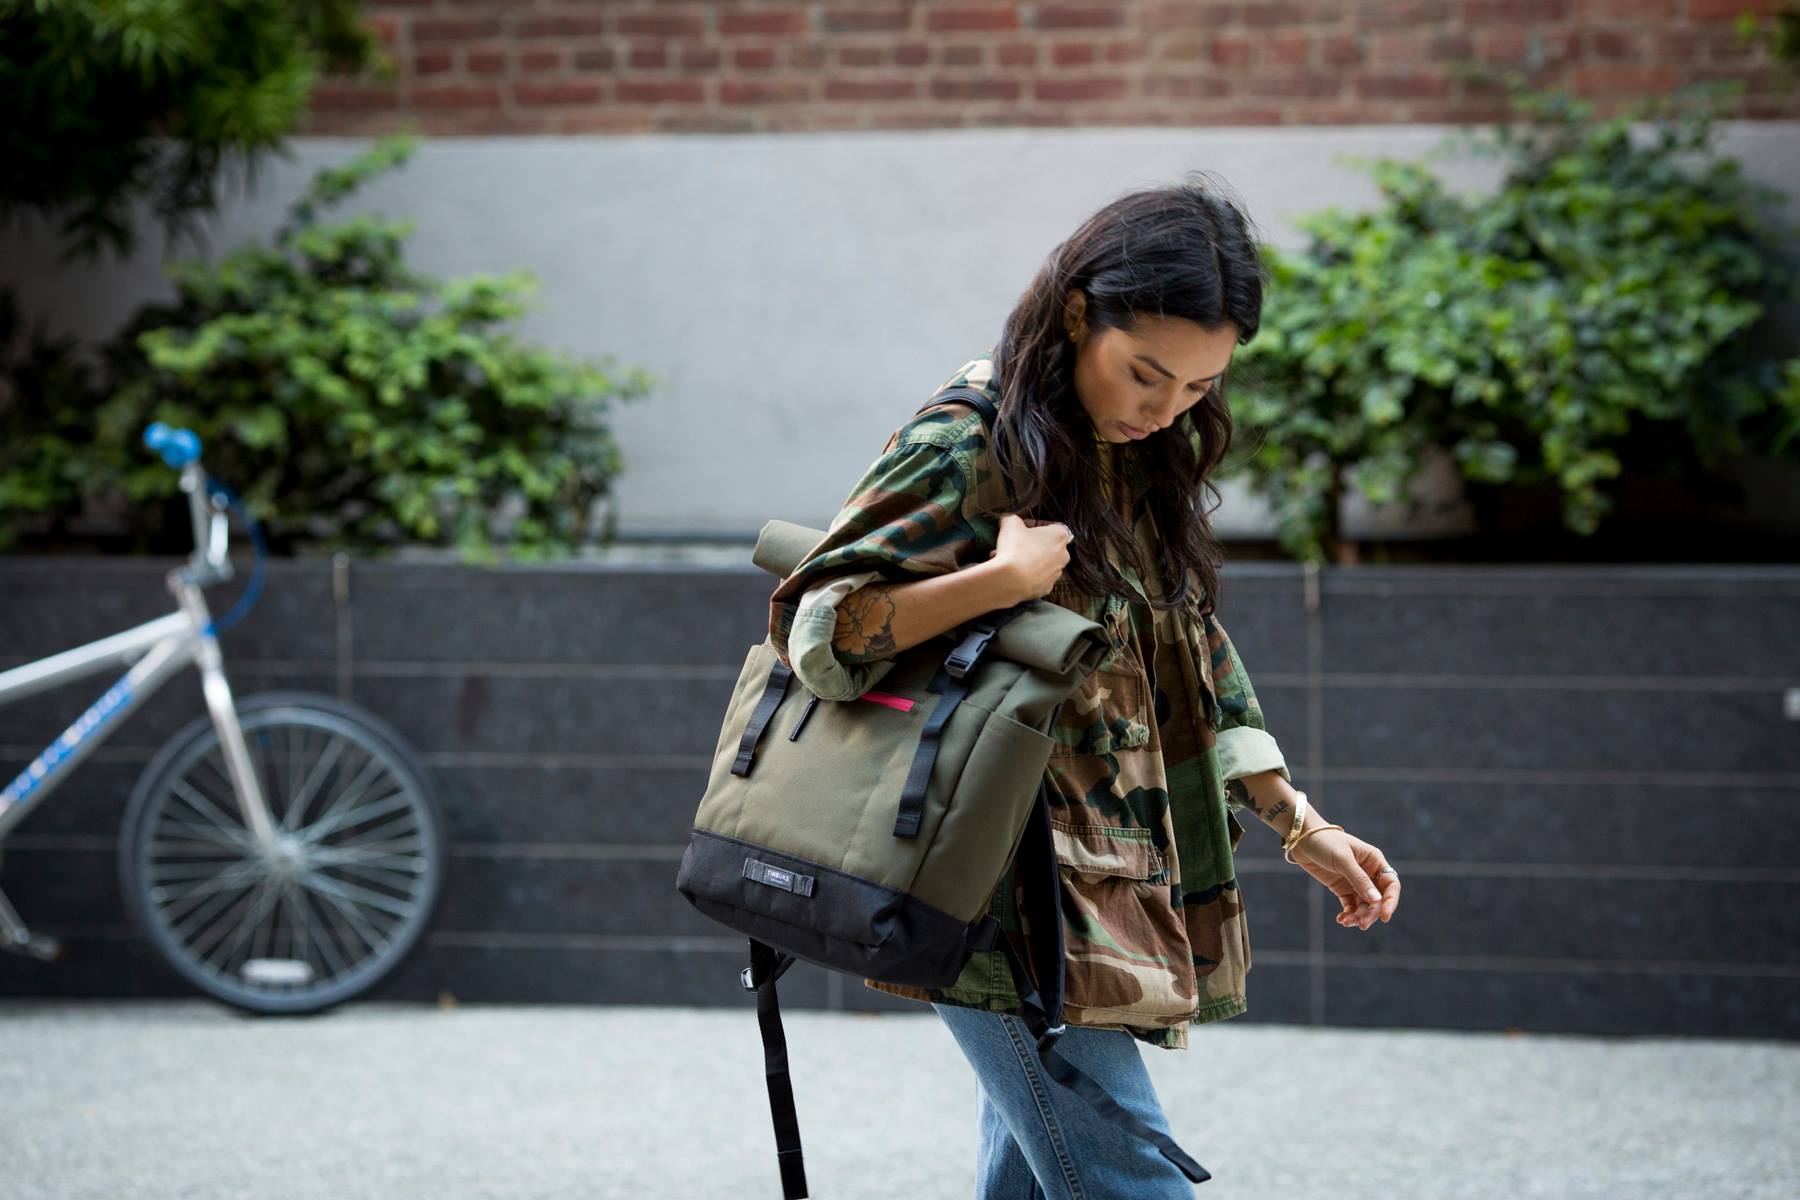    Timbuk2    Who isn't looking for a bag with a lifetime warranty? SF-based Timbuk2 will hook you up for the long haul with everything from bike messenger satchels and saddle bags to its brilliantly-named Mutt Mover dog carrier. In San Francisco, yo